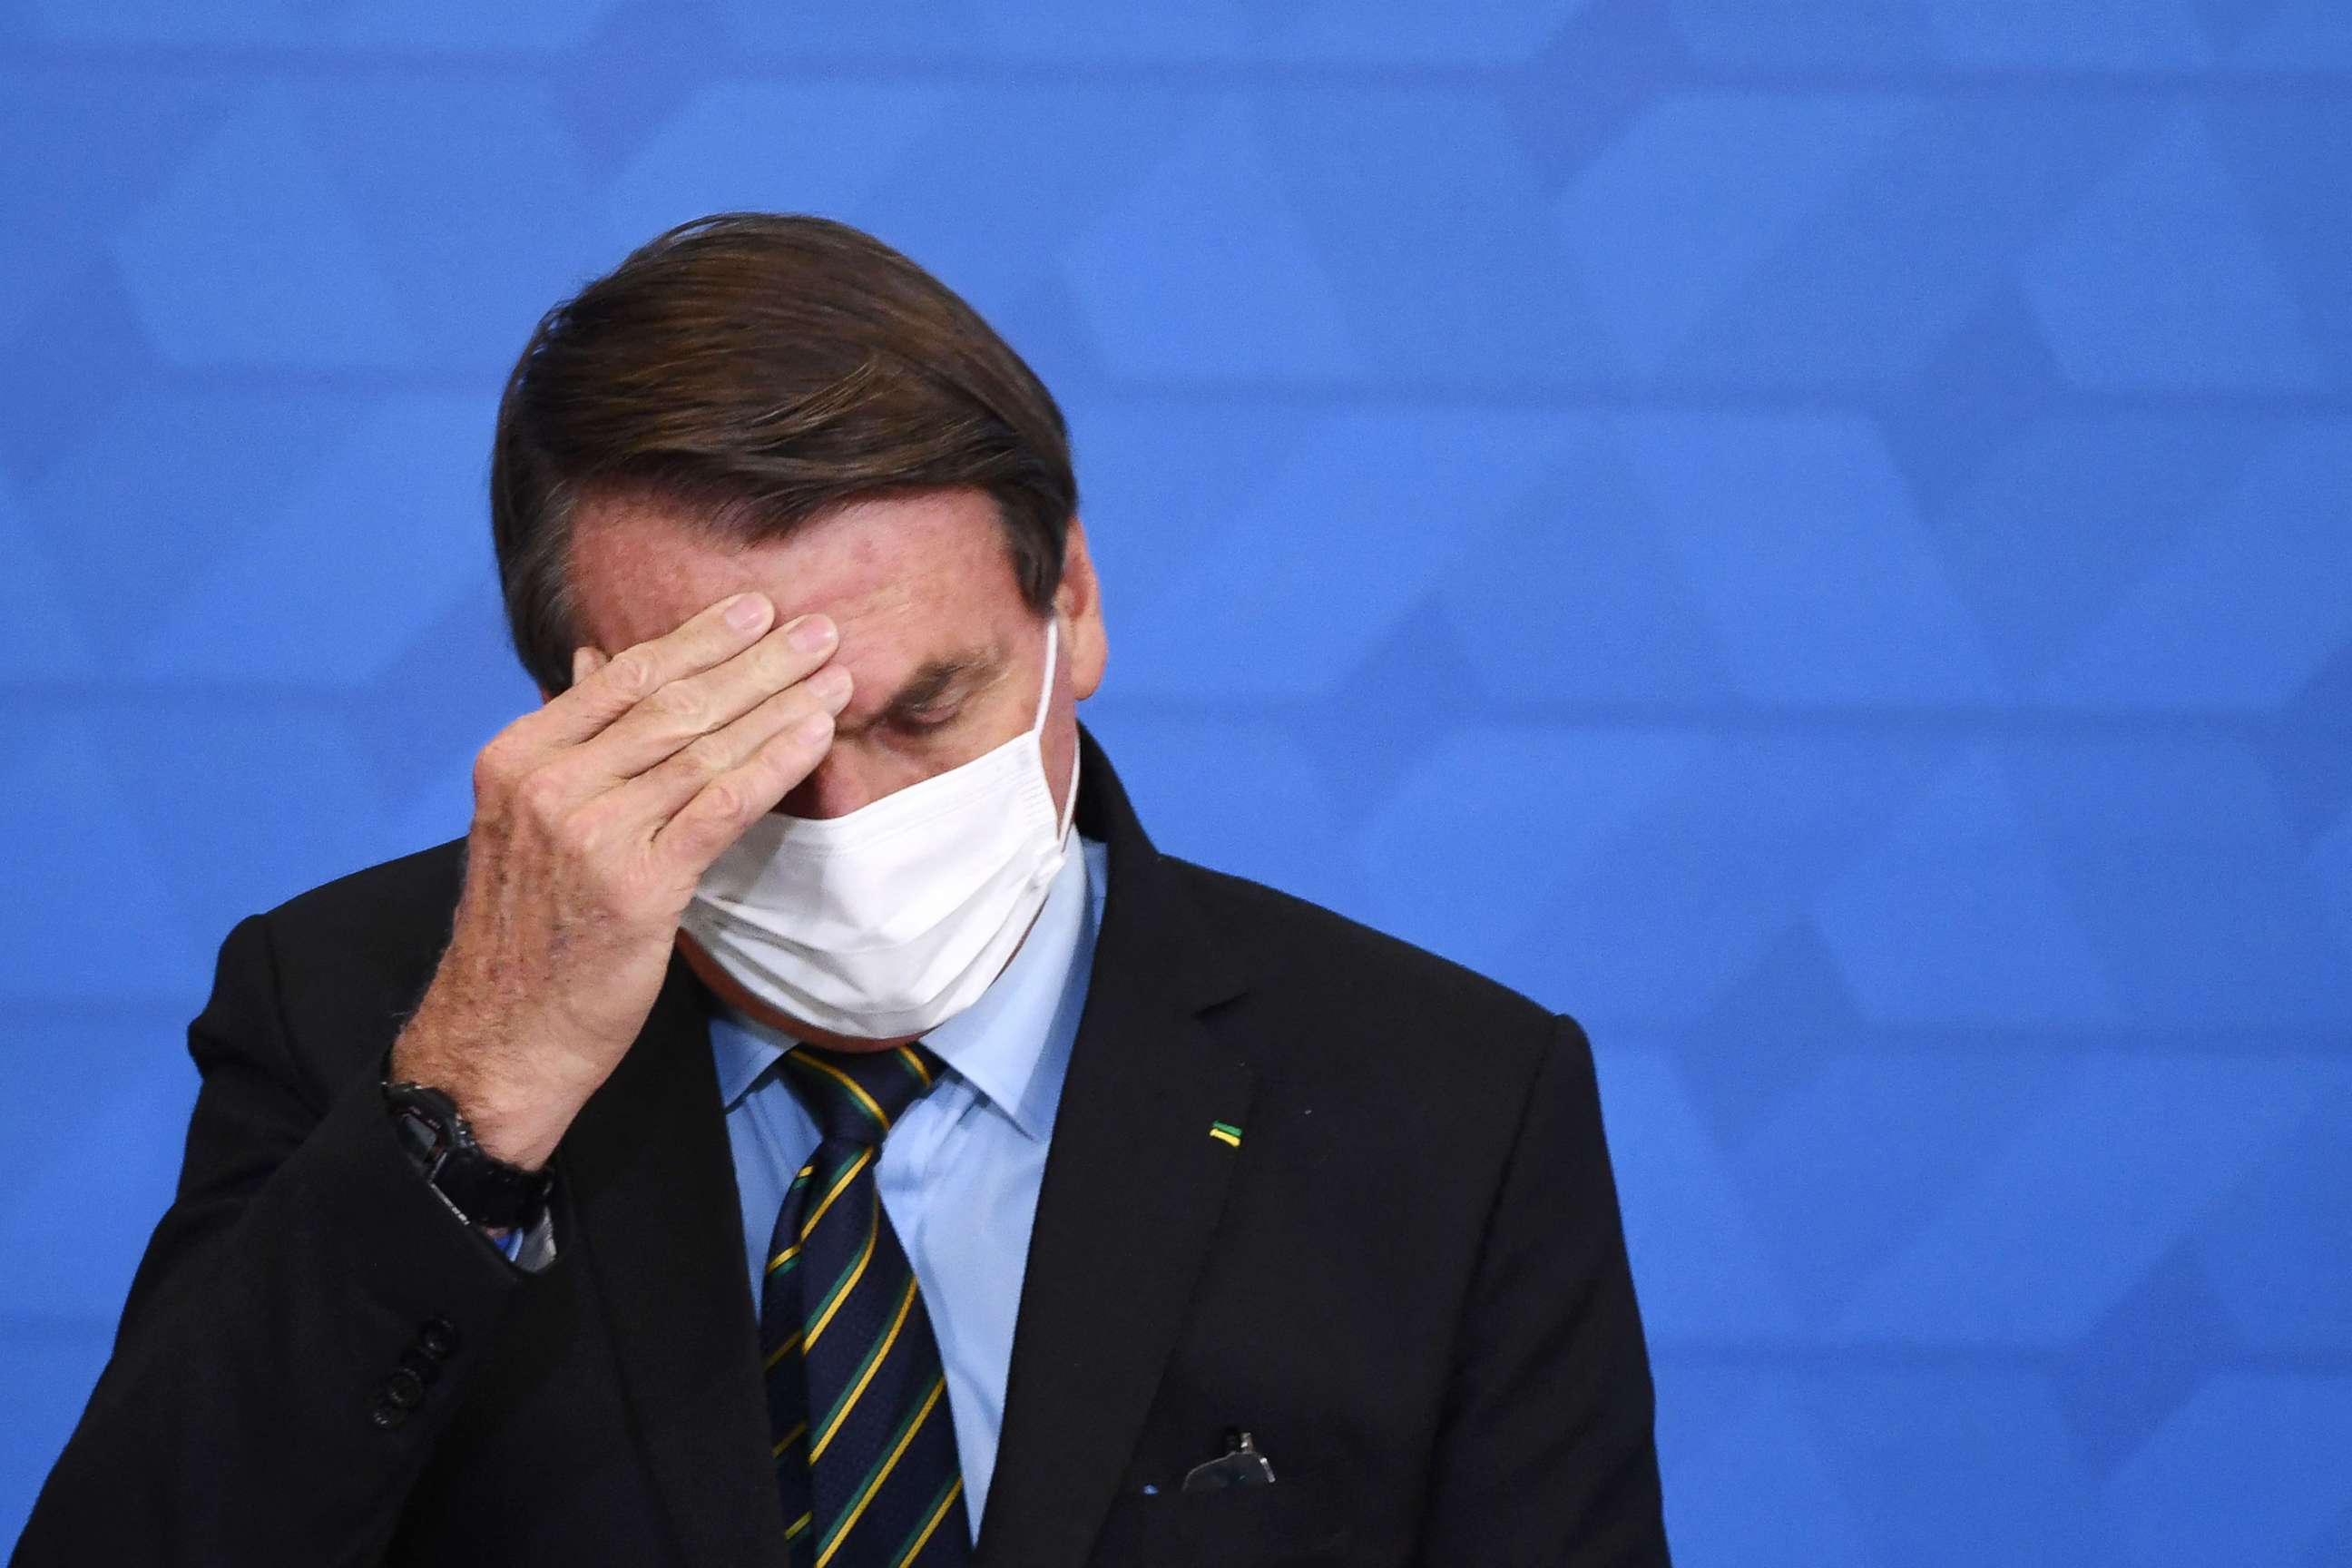 PHOTO: Brazil President Jair Bolsonaro gestures as he speaks during the announcement of support measures to philanthropic hospitals in the fight against the novel coronavirus disease, COVID-19, at Planalto Palace in Brazil, March 25, 2021.